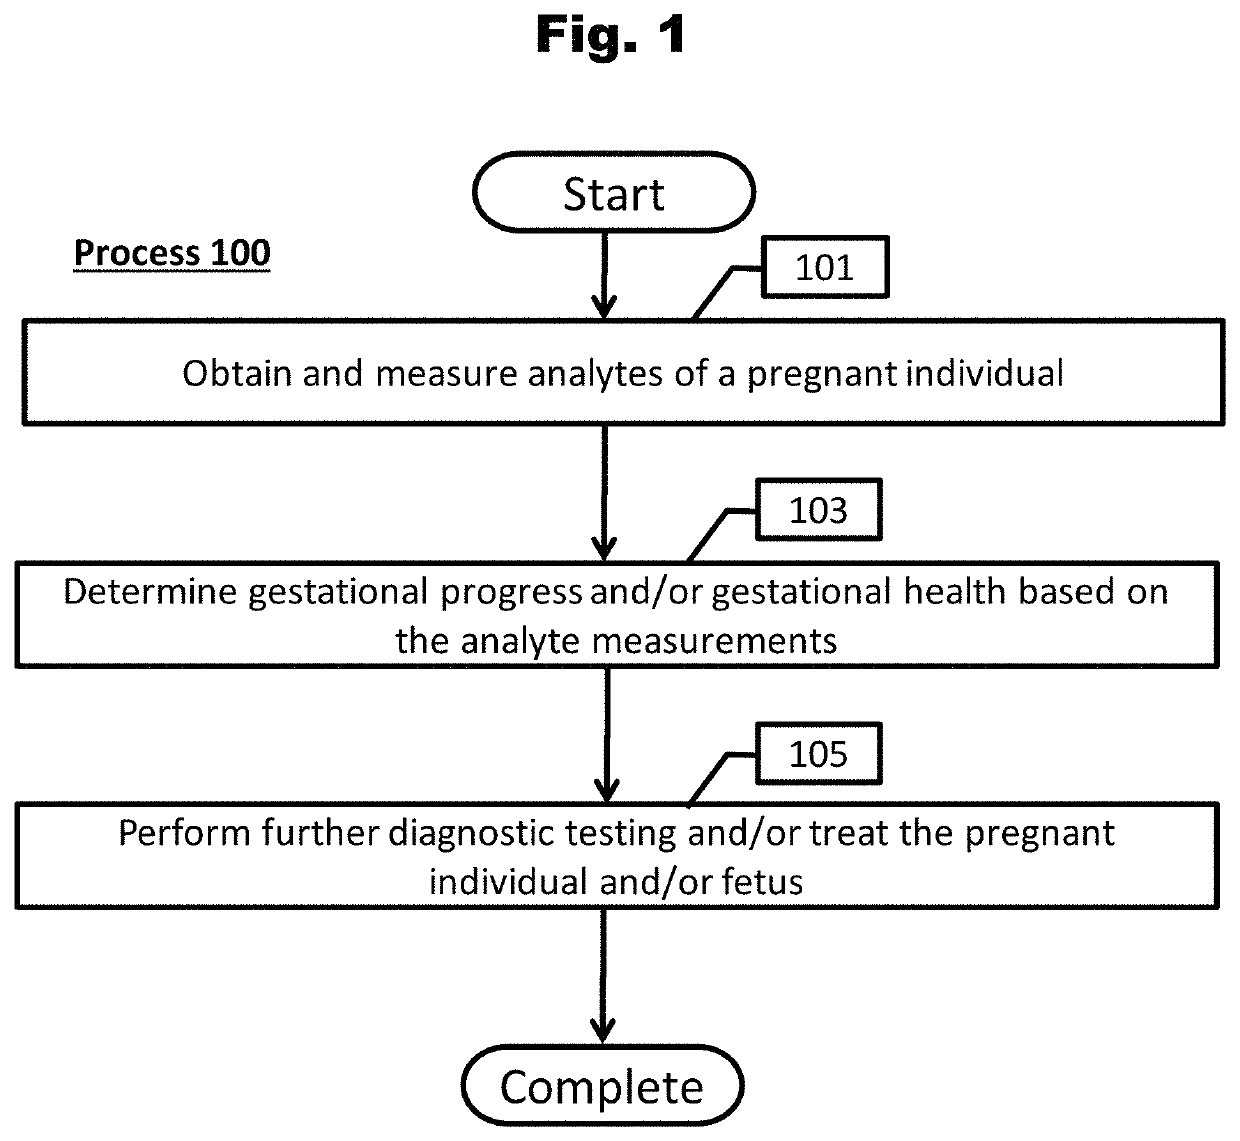 Methods for Evaluation of Gestational Progress and Preterm Abortion for Clinical Intervention and Applications Thereof